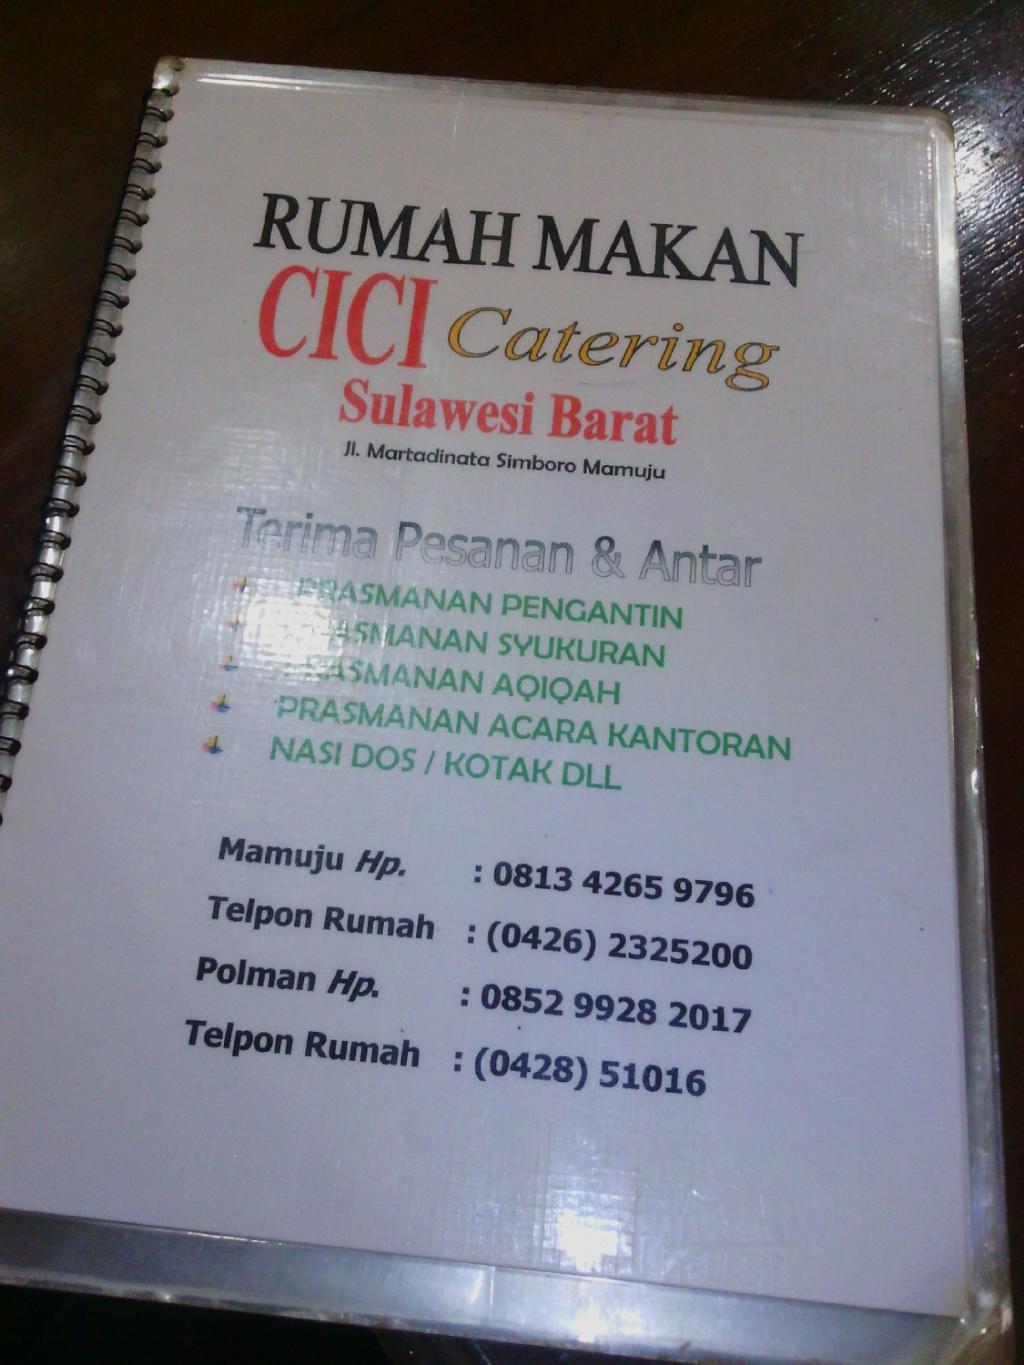 RM Cici Catering